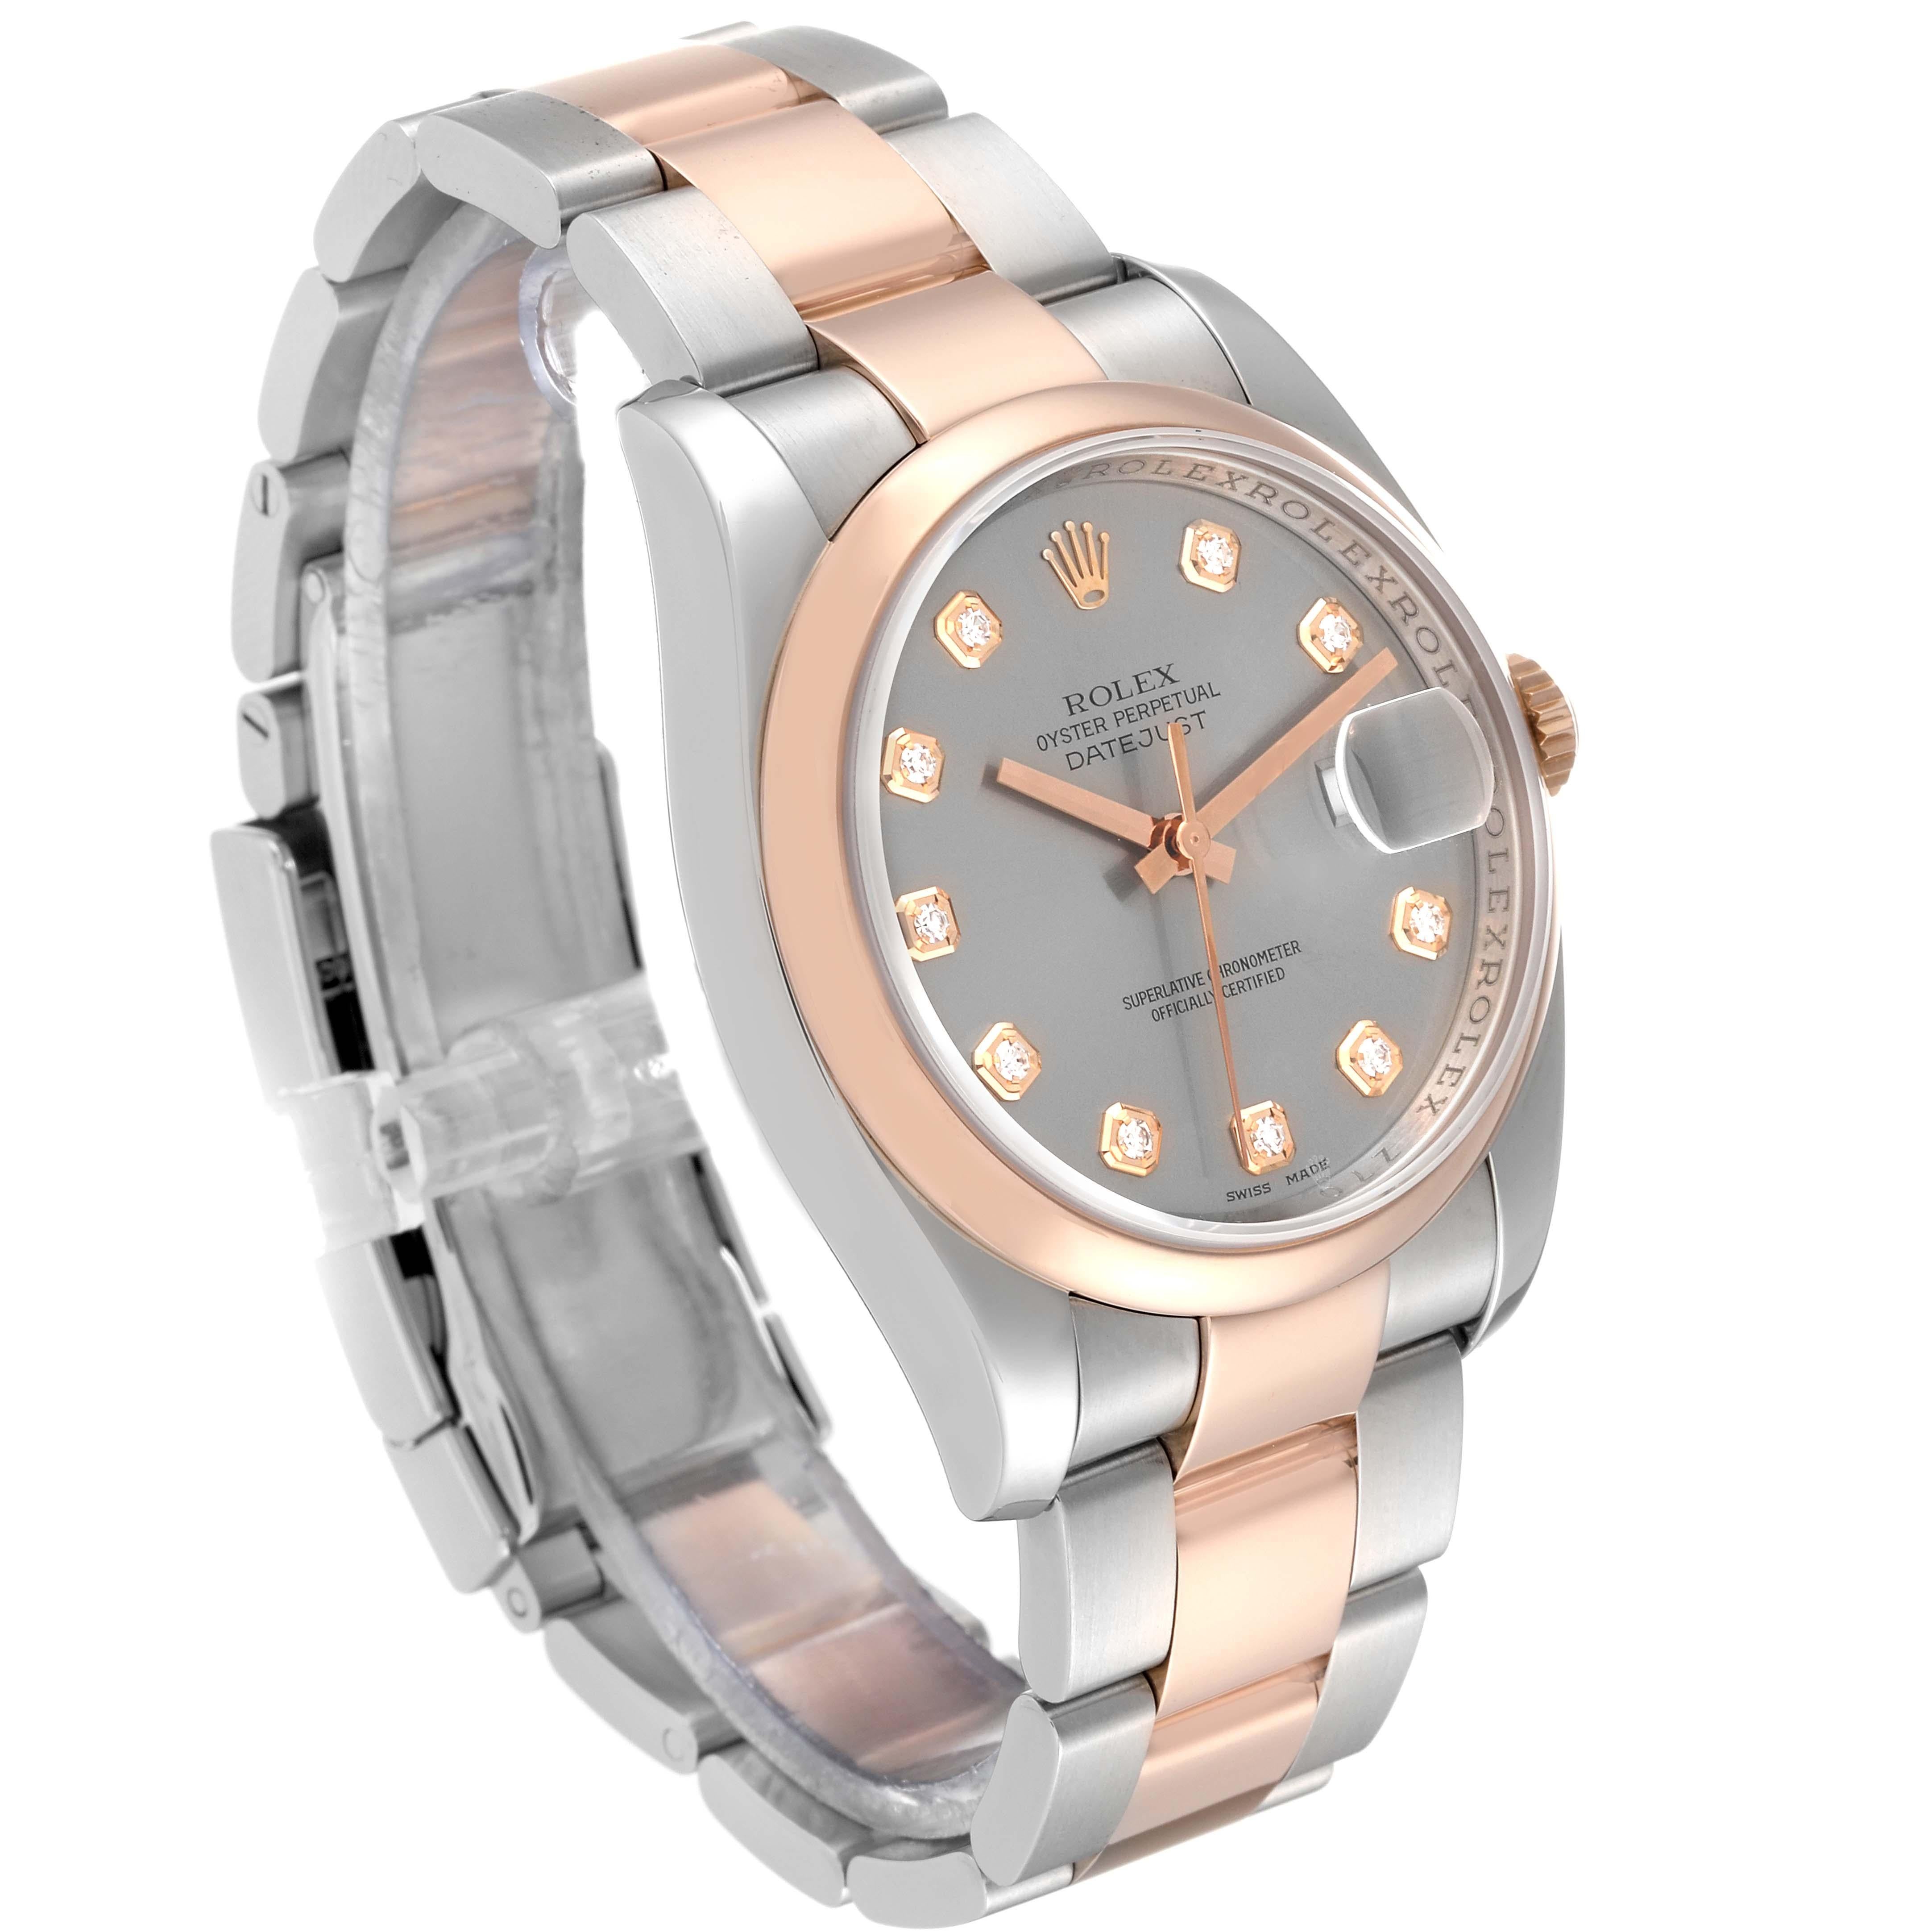 Rolex Datejust 36 Steel Rose Gold Silver Diamond Dial Mens Watch 116201 Box Card For Sale 4